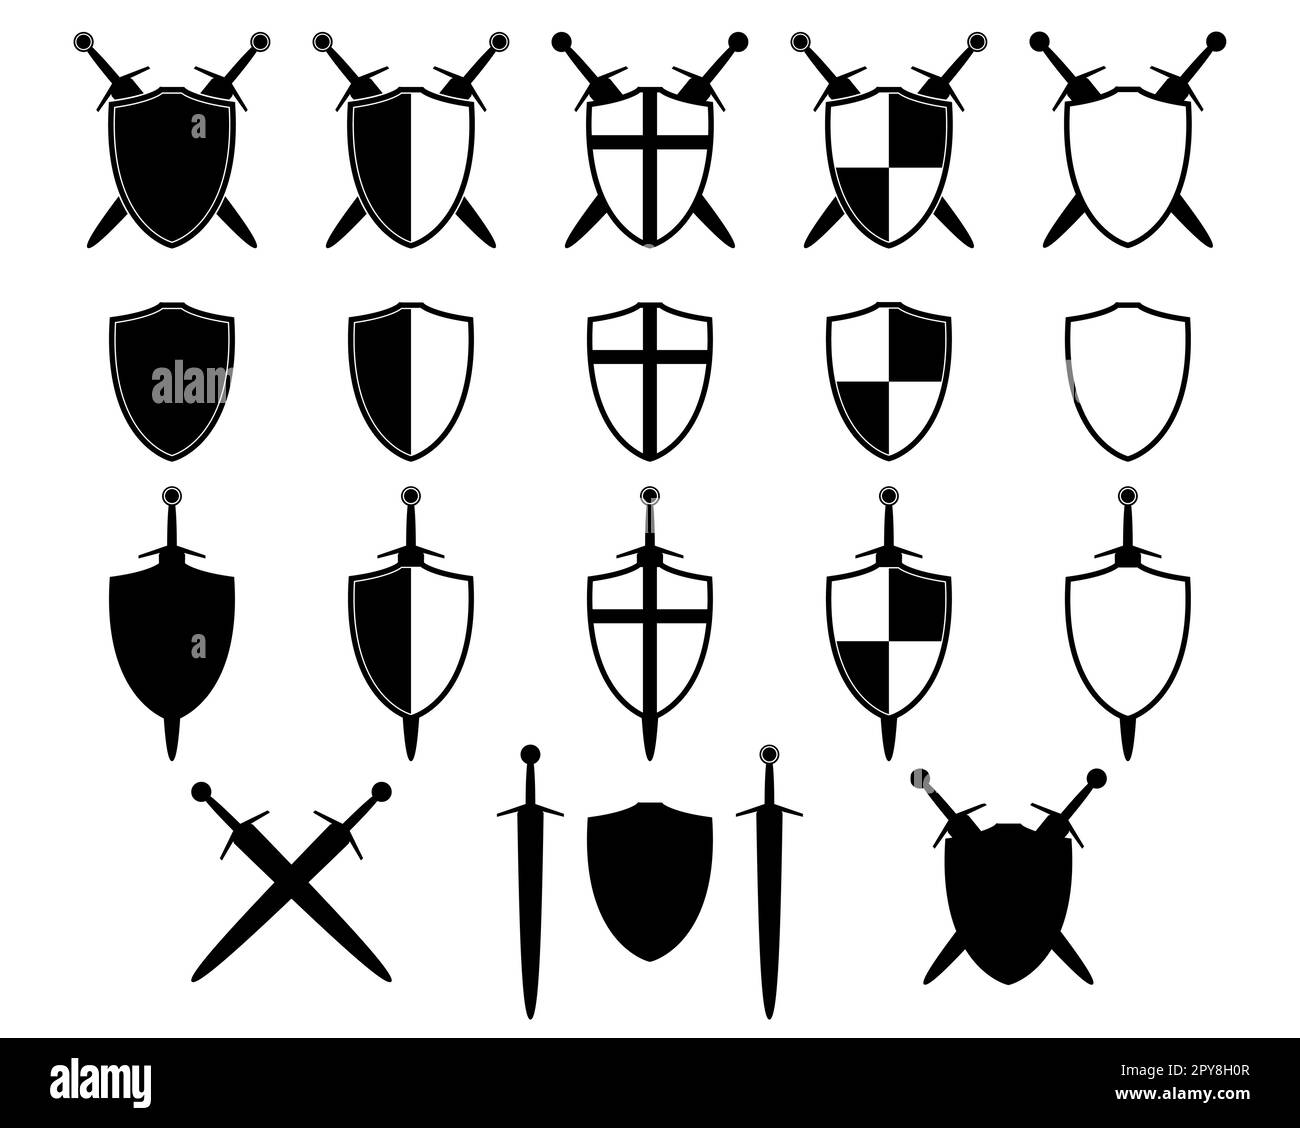 shield with sword set icon silhouette, vector illustration of medieval swords and shields isolated on a white Stock Vector